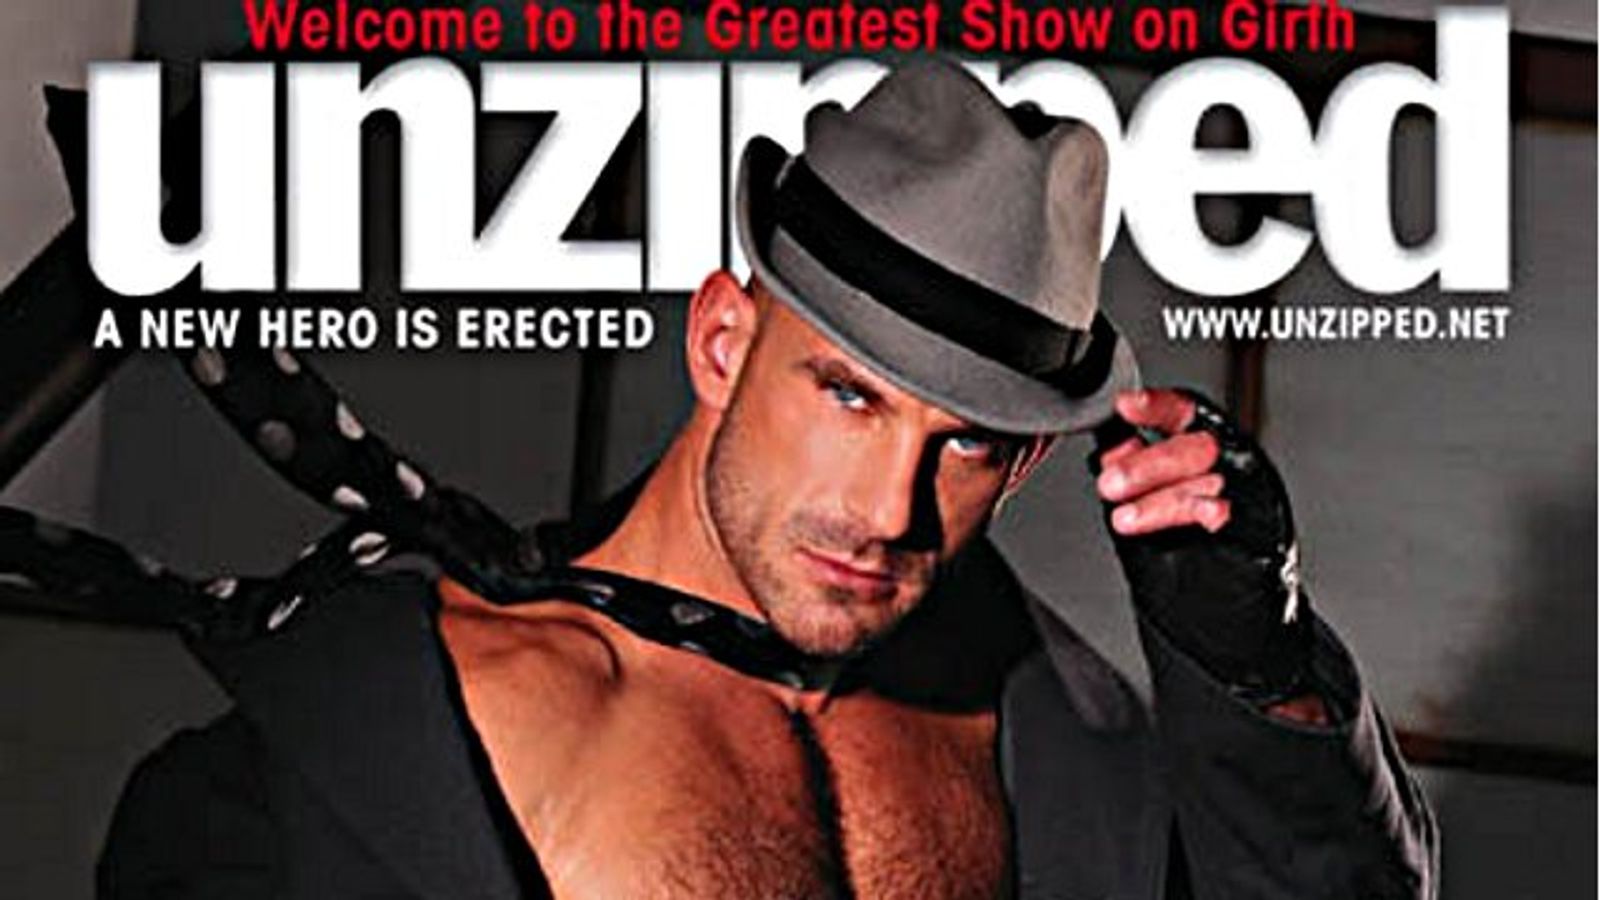 Samuel Colt Named ‘Unzipped’ Magazine’s ‘Man of the Year’